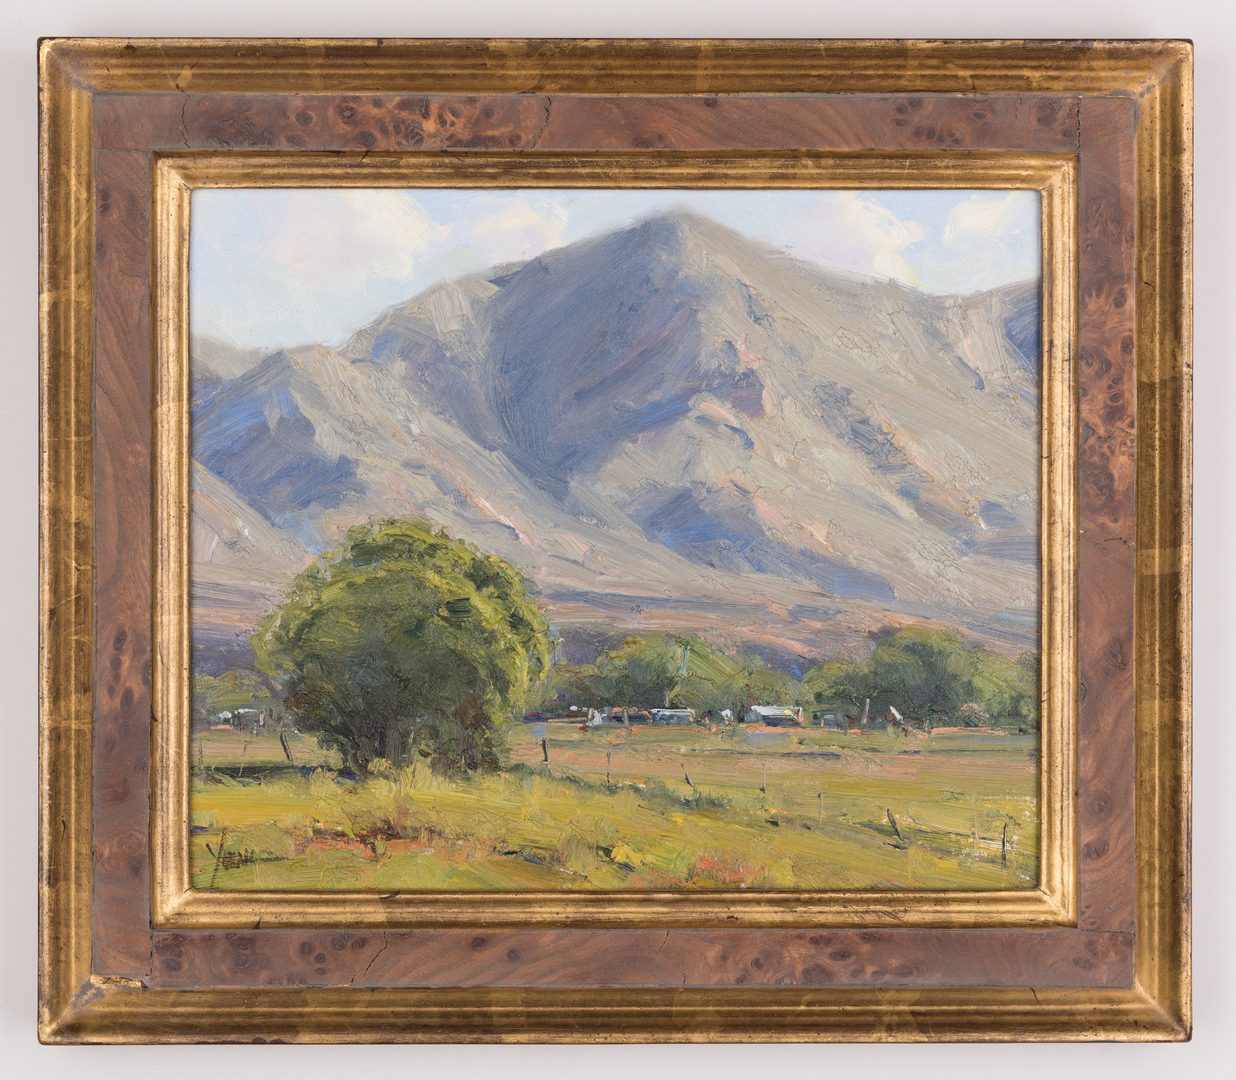 Lot 204: Dan Young, Oil on Panel, "Summer Night"